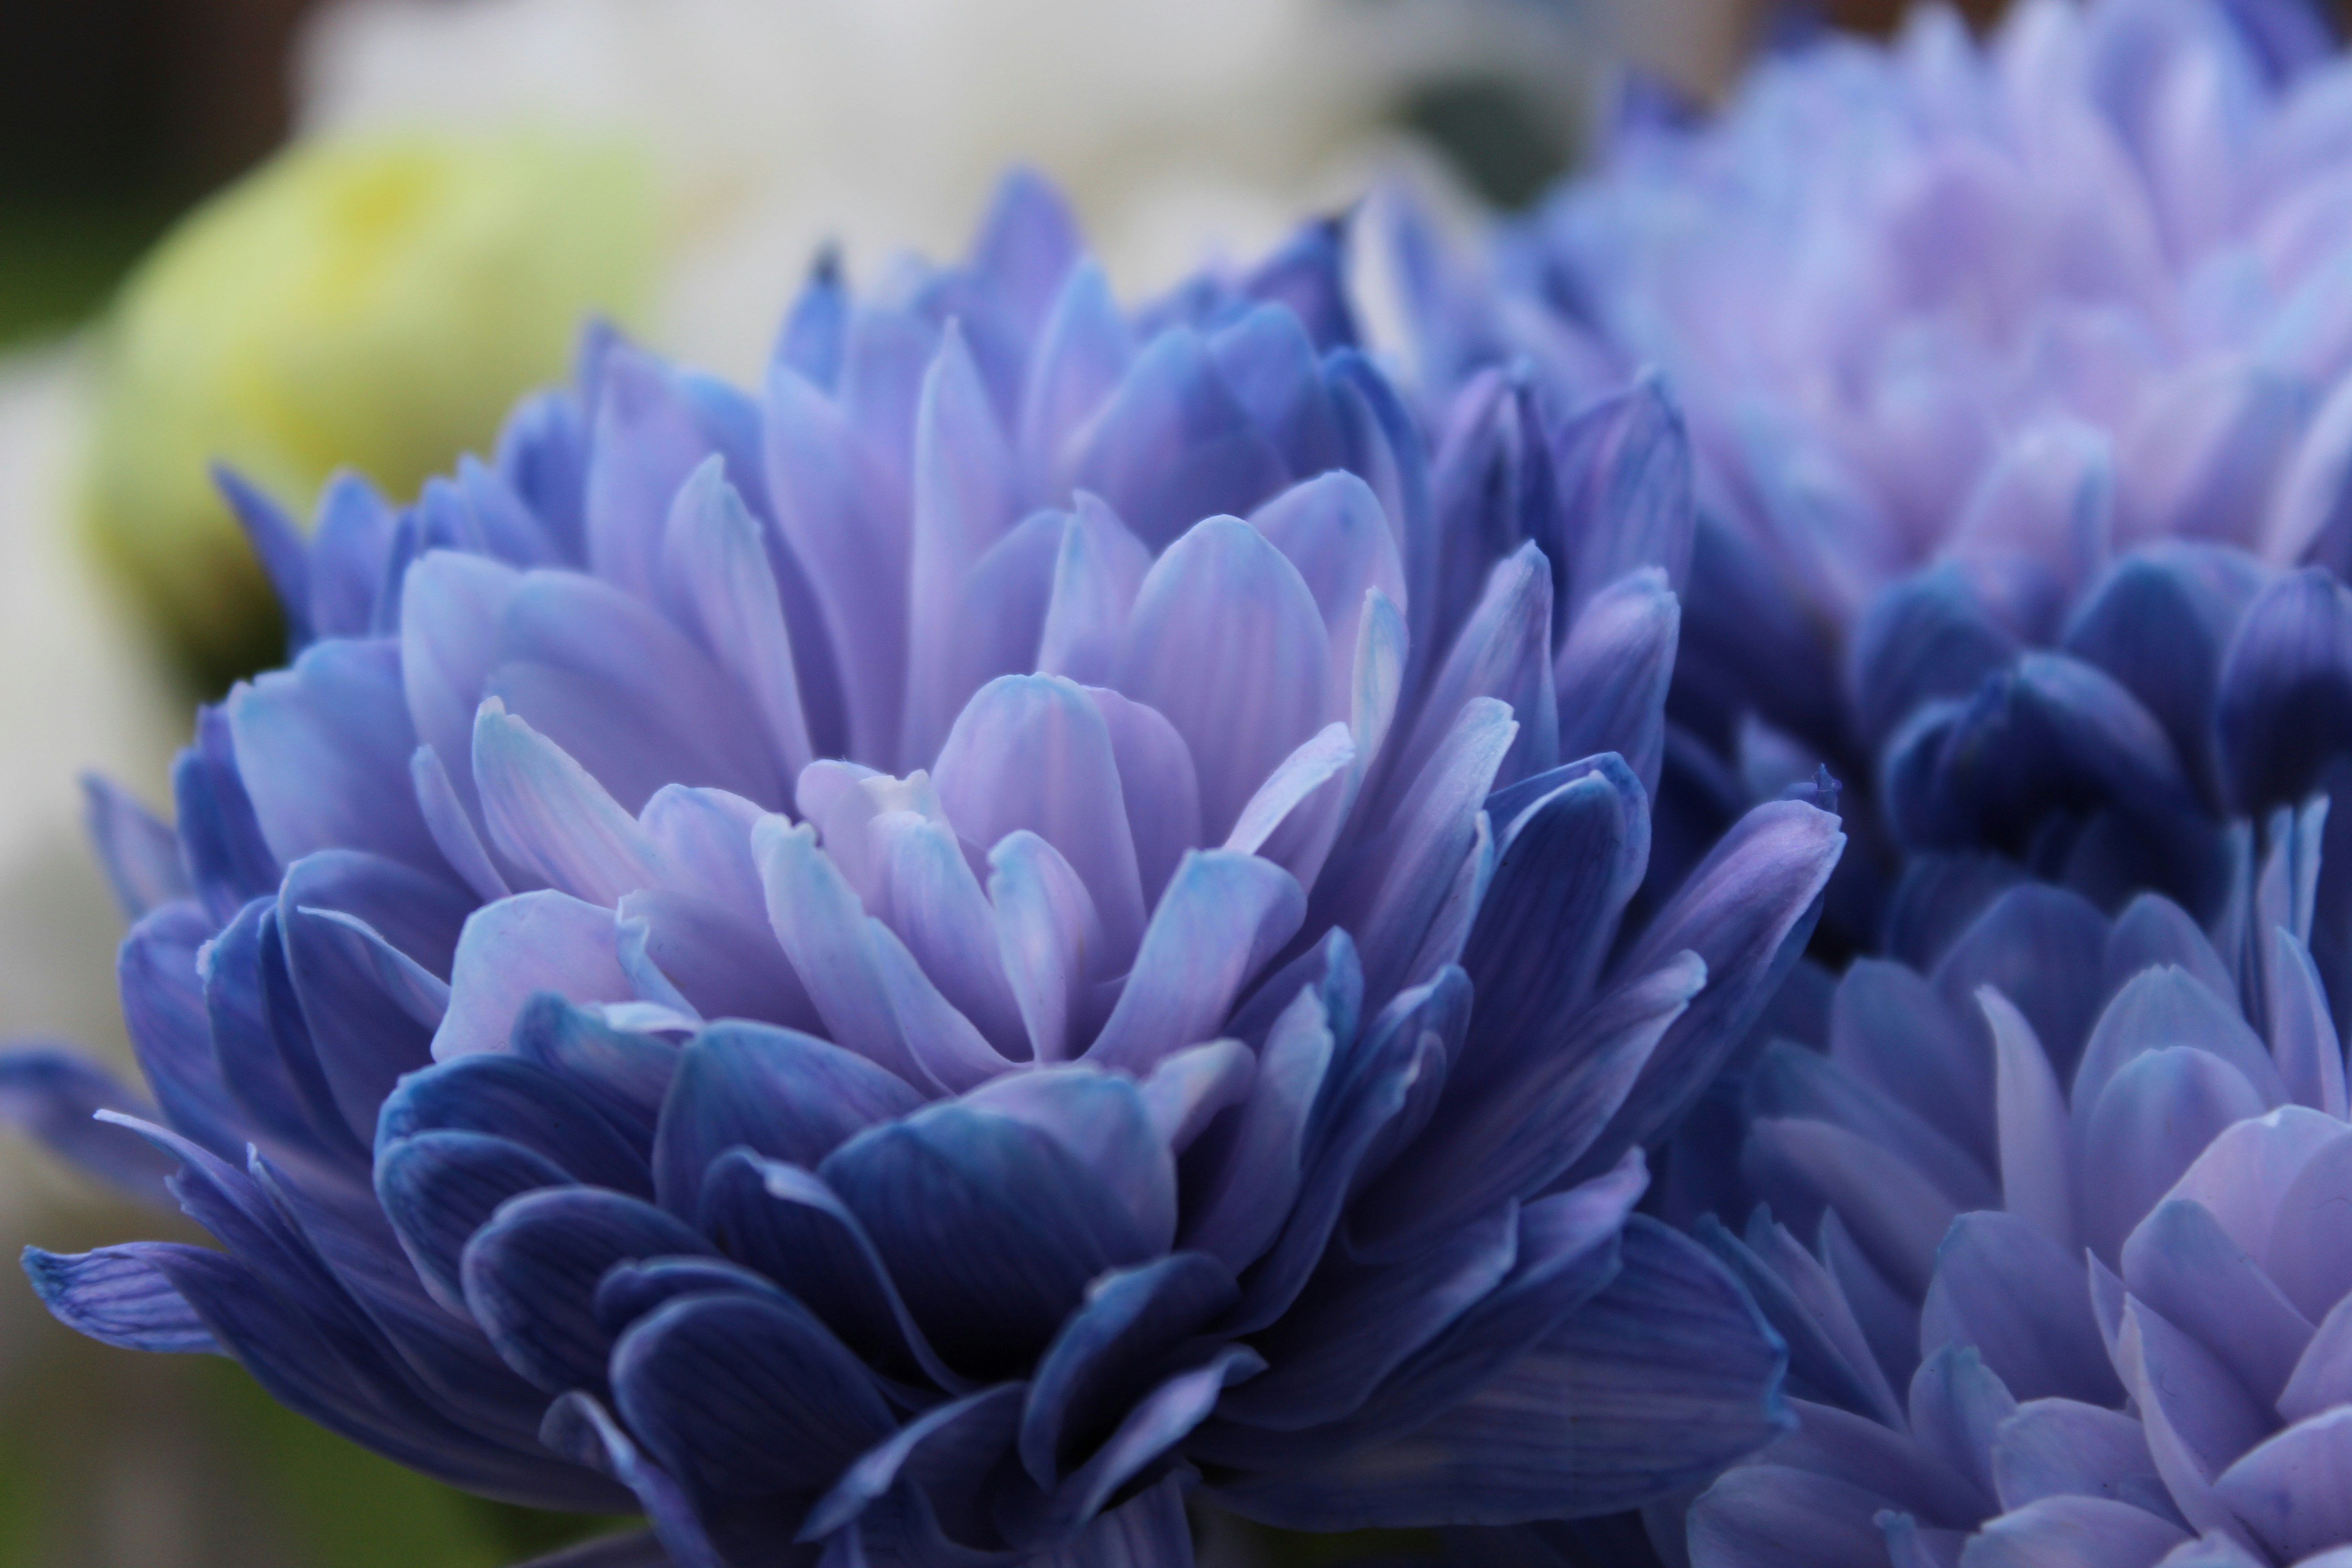 This is a close up images of a blue flower with some of the same flowers blurred in the background. The petals have purple accents as they get closer to the middle.  